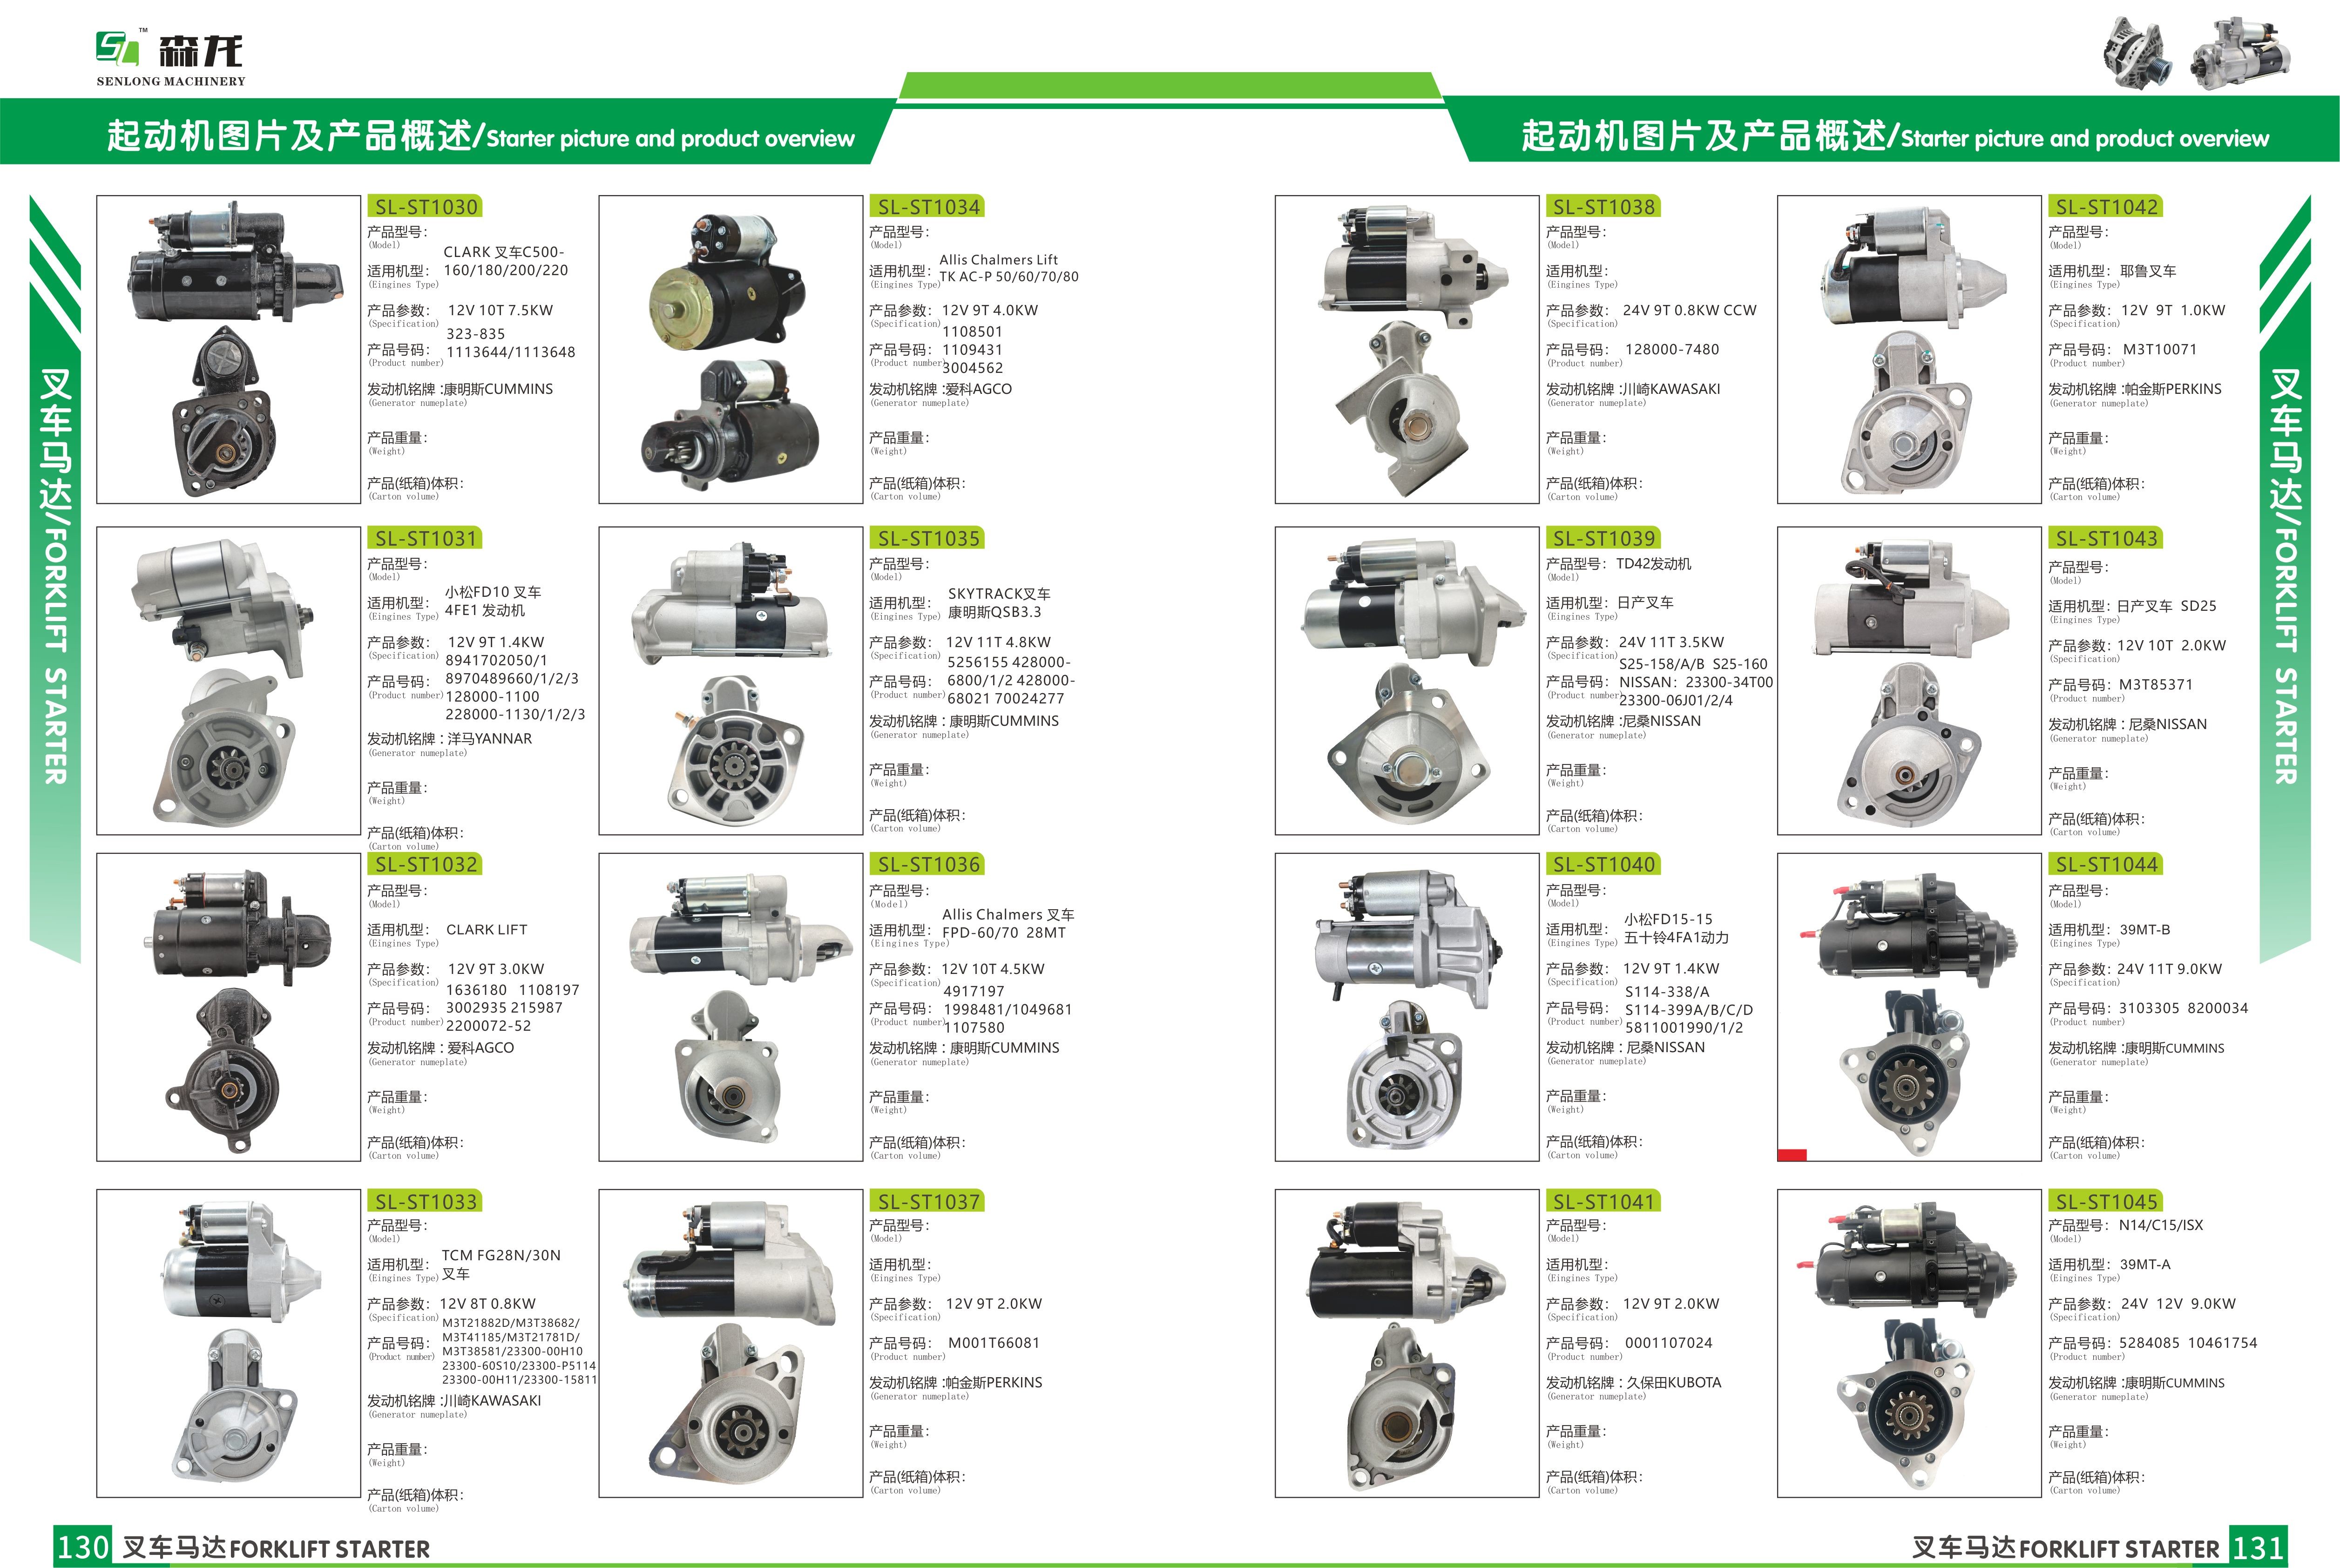 Starter motor Mitsubishi Ford Truck  M009T64671, M9T64671,6C4611000CA, T186001,CST35692, CST35692AS, CST35692ES,